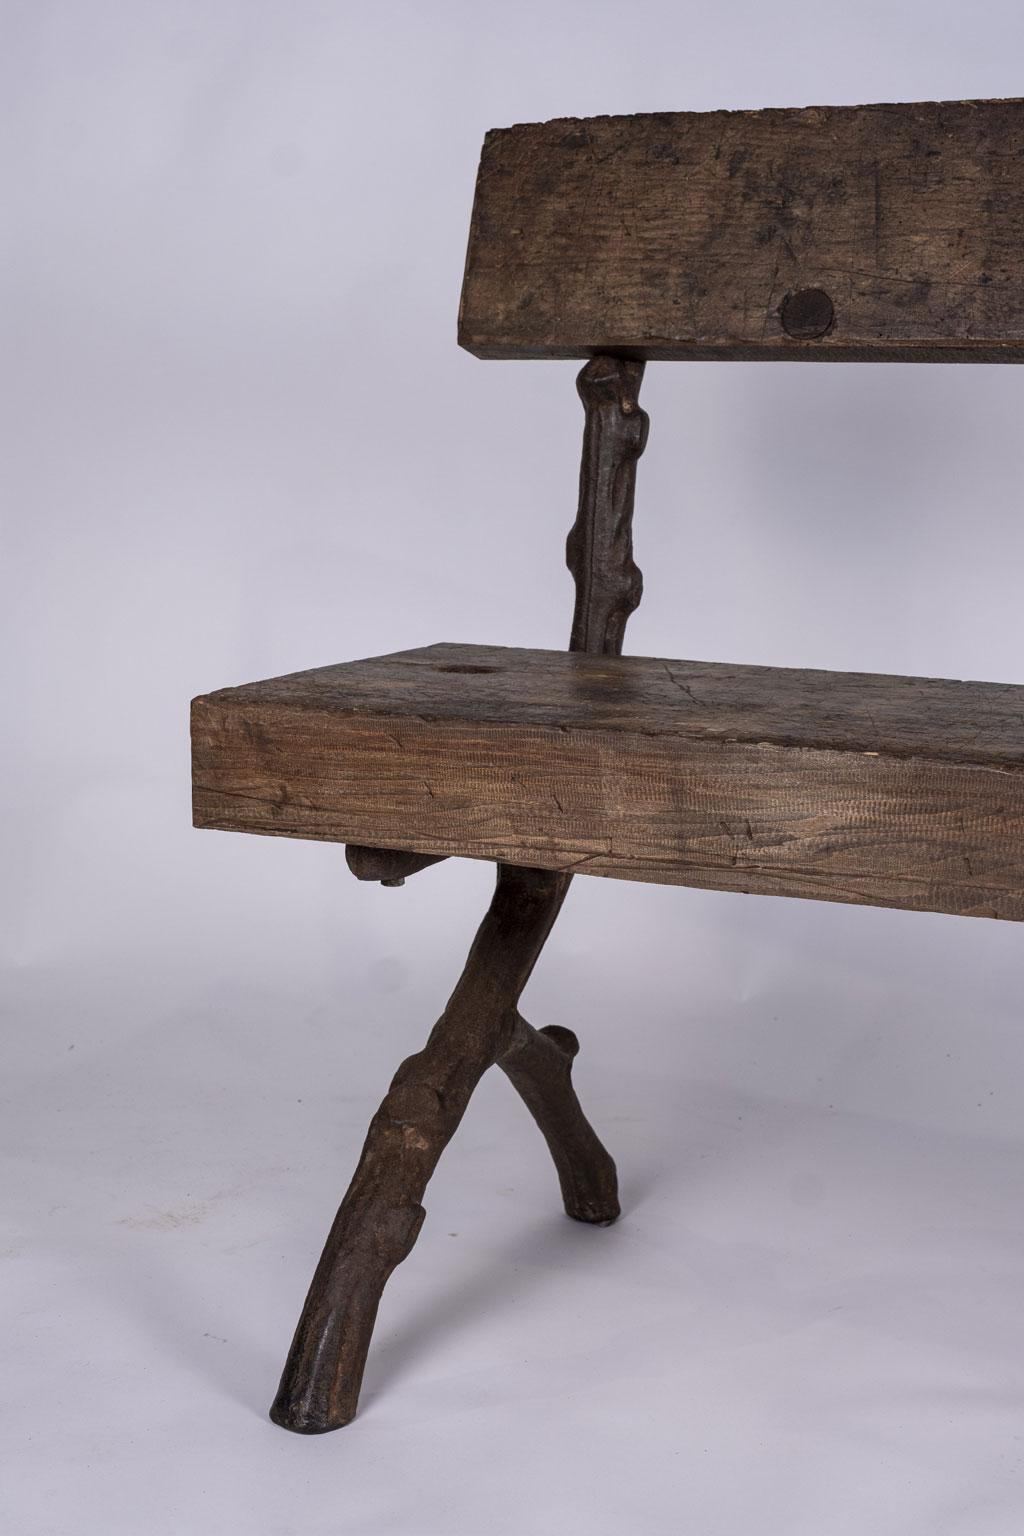 Belgian iron faux bois bench cast circa 1900-1920. Large thick plank back and seat supported by cast iron 